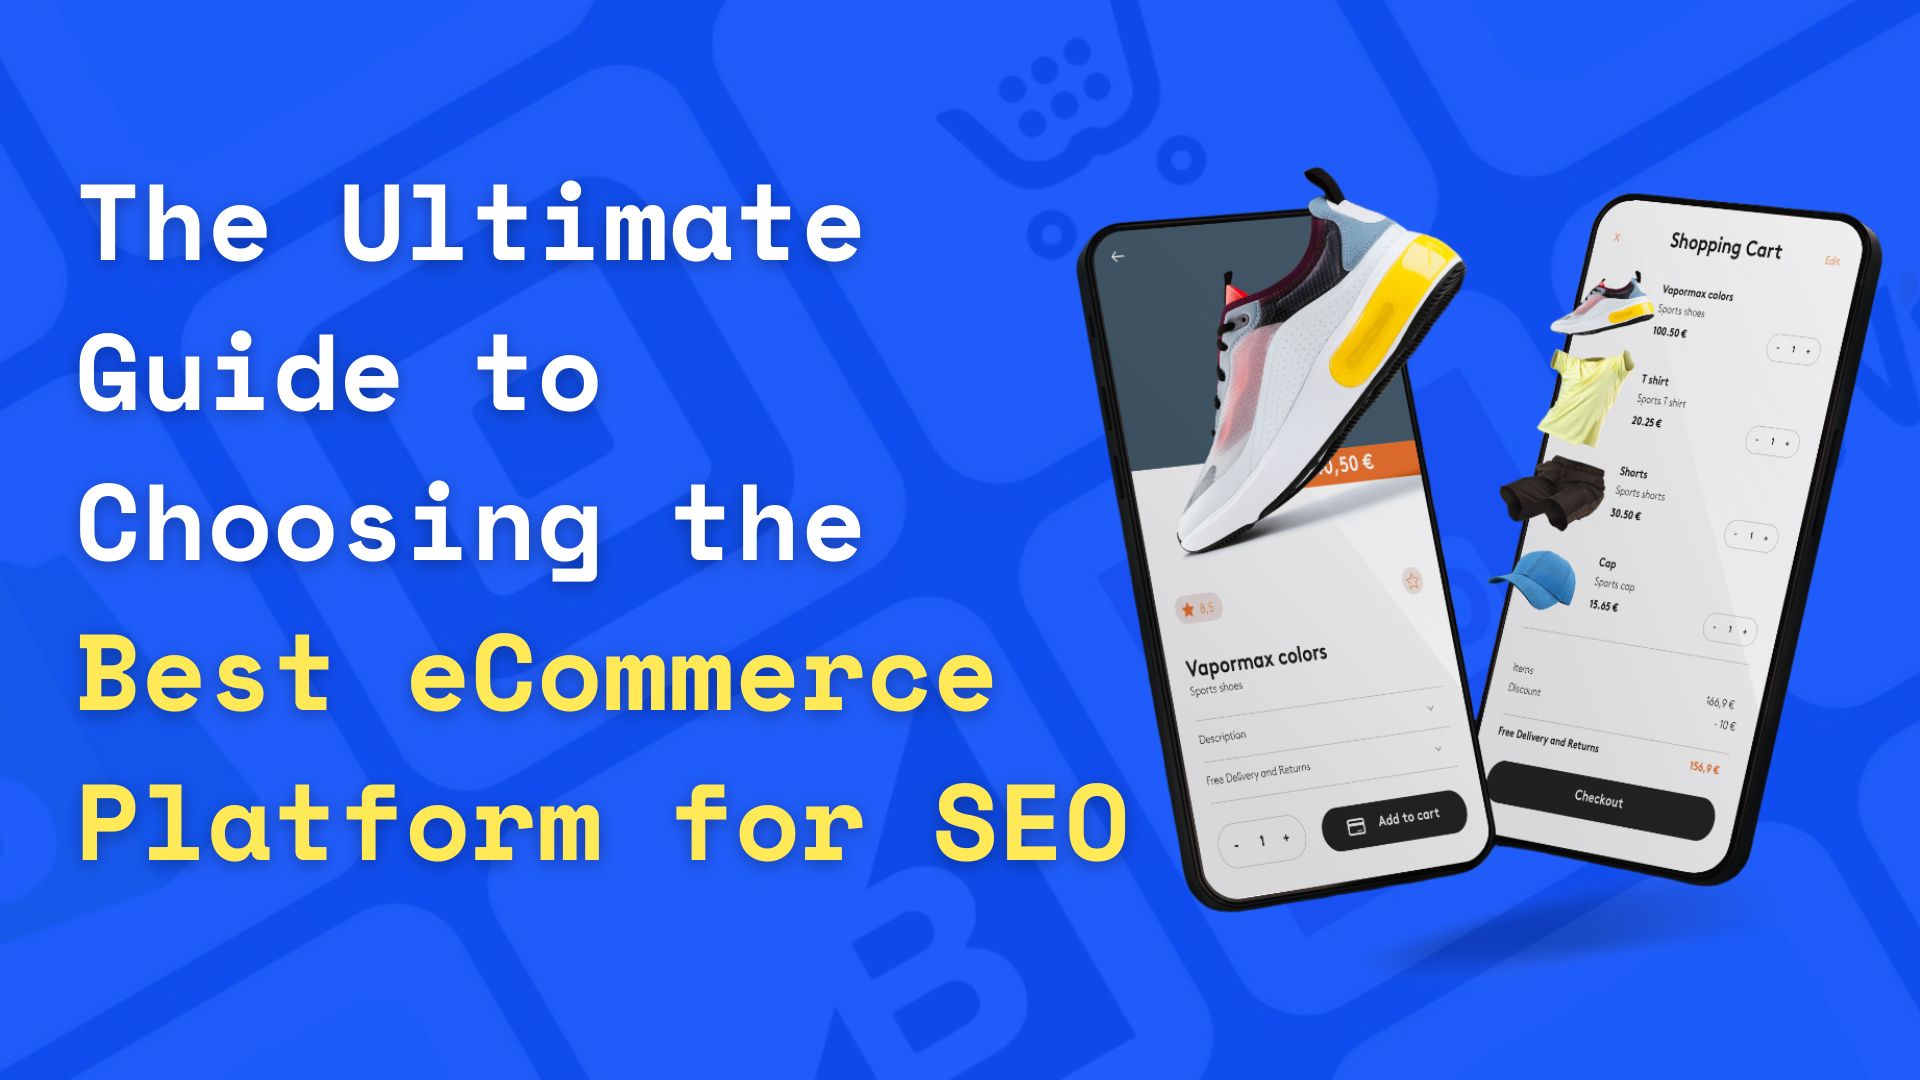 The Ultimate Guide to Choosing the Best eCommerce Platform for SEO